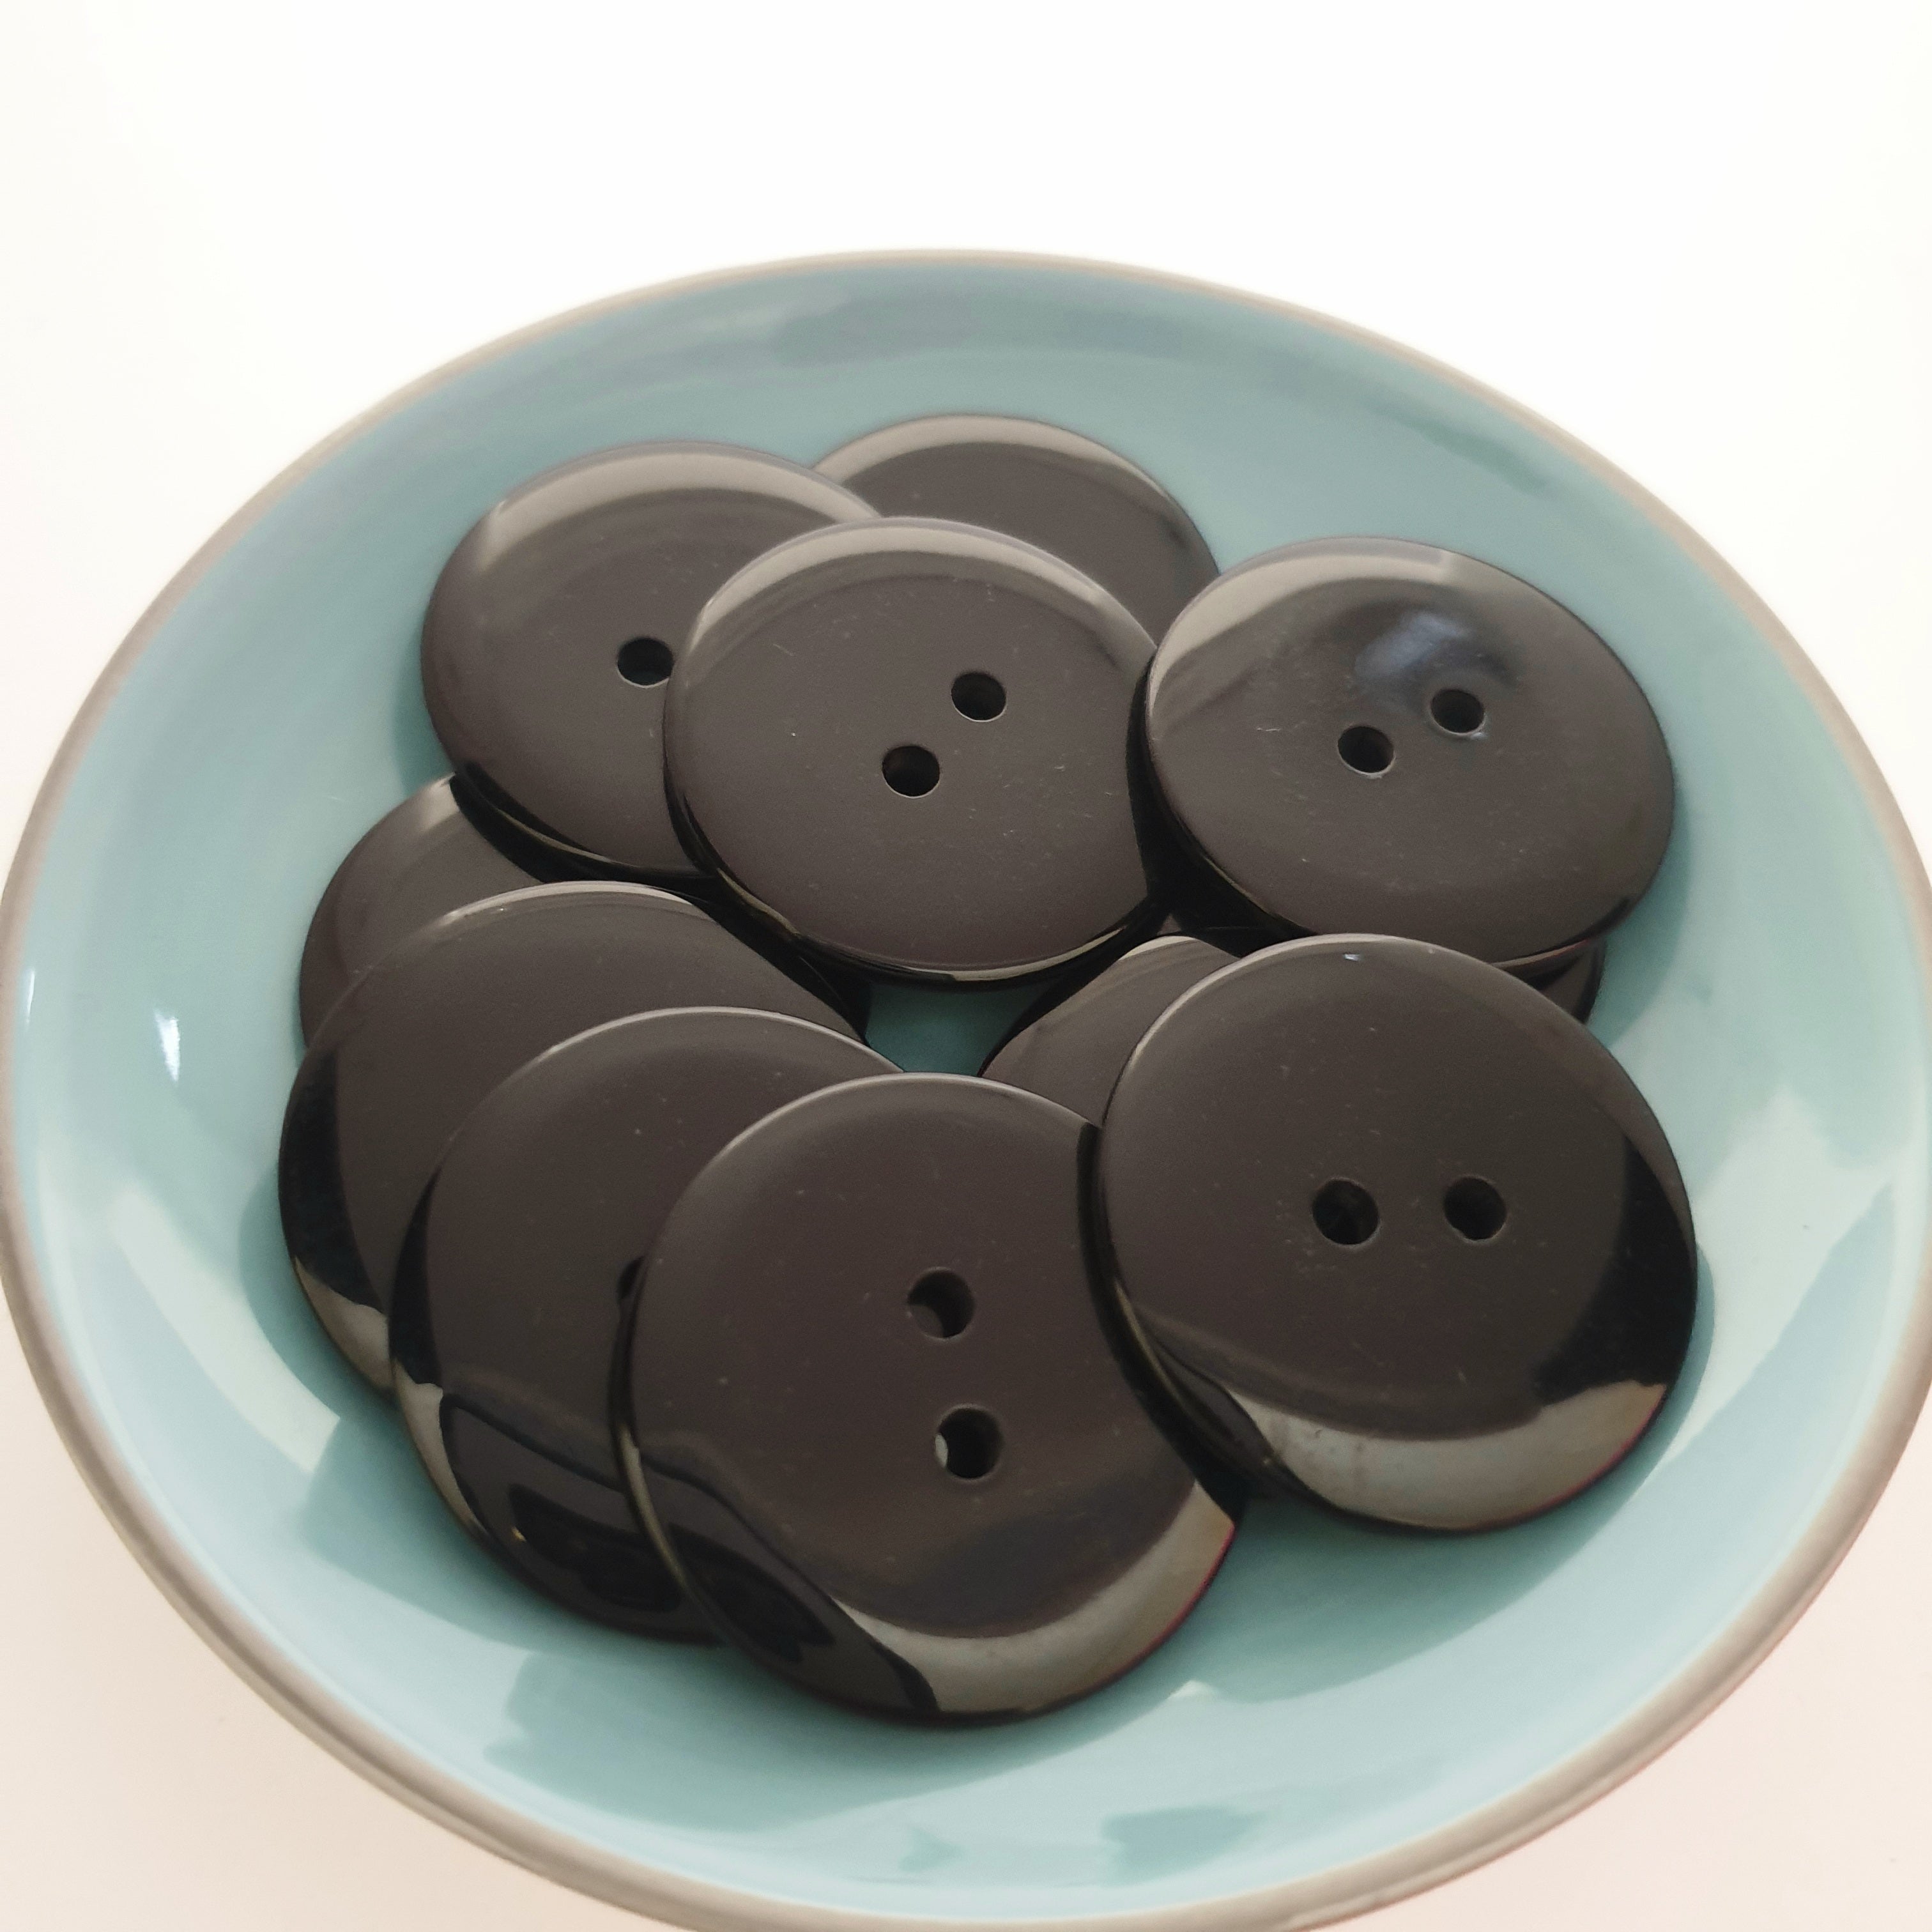 MajorCrafts 12pcs 30mm Black 2 holes Large Round Resin Sewing Buttons